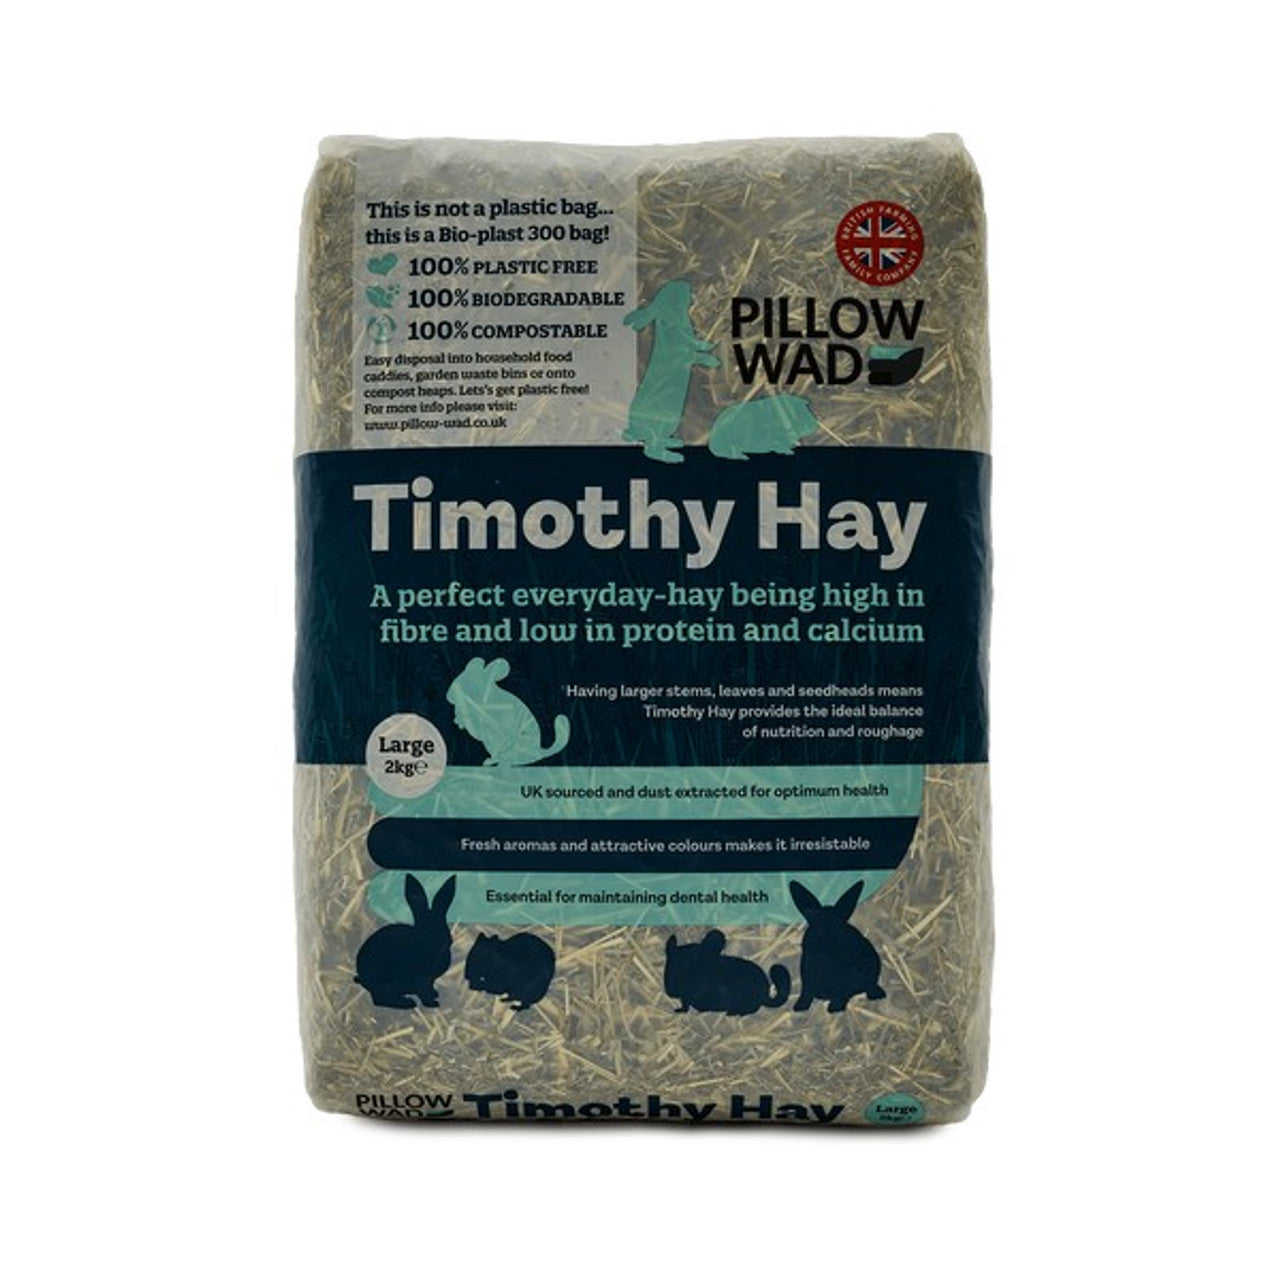 Pillow Wad Timothy Hay Large 2kg - (Biodegradable Packaging)